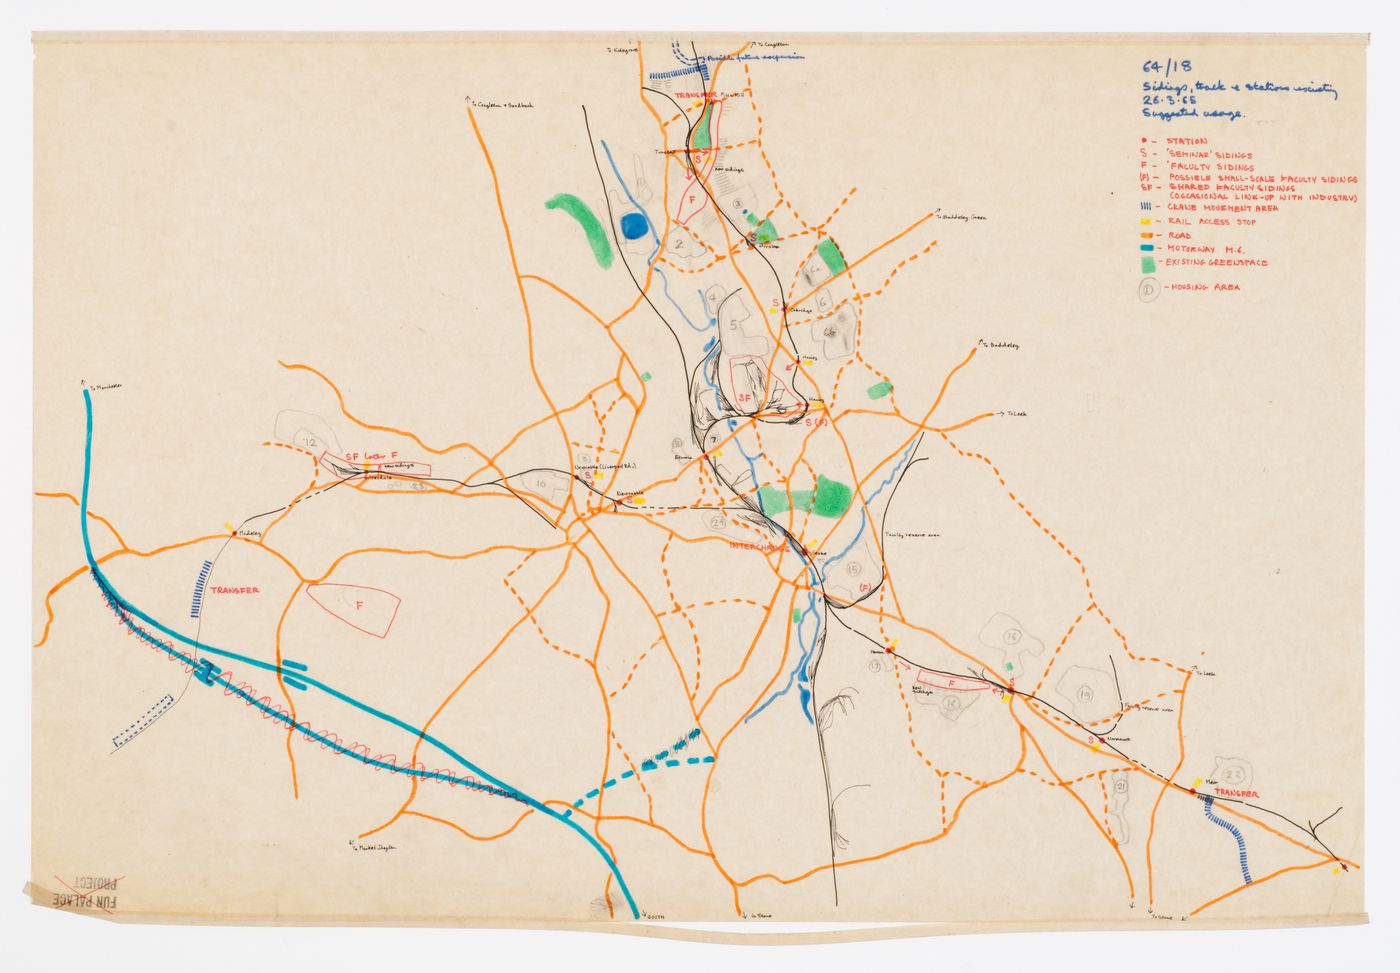 Potteries Thinkbelt: map of existing sidings, tracks and stations with suggested usage